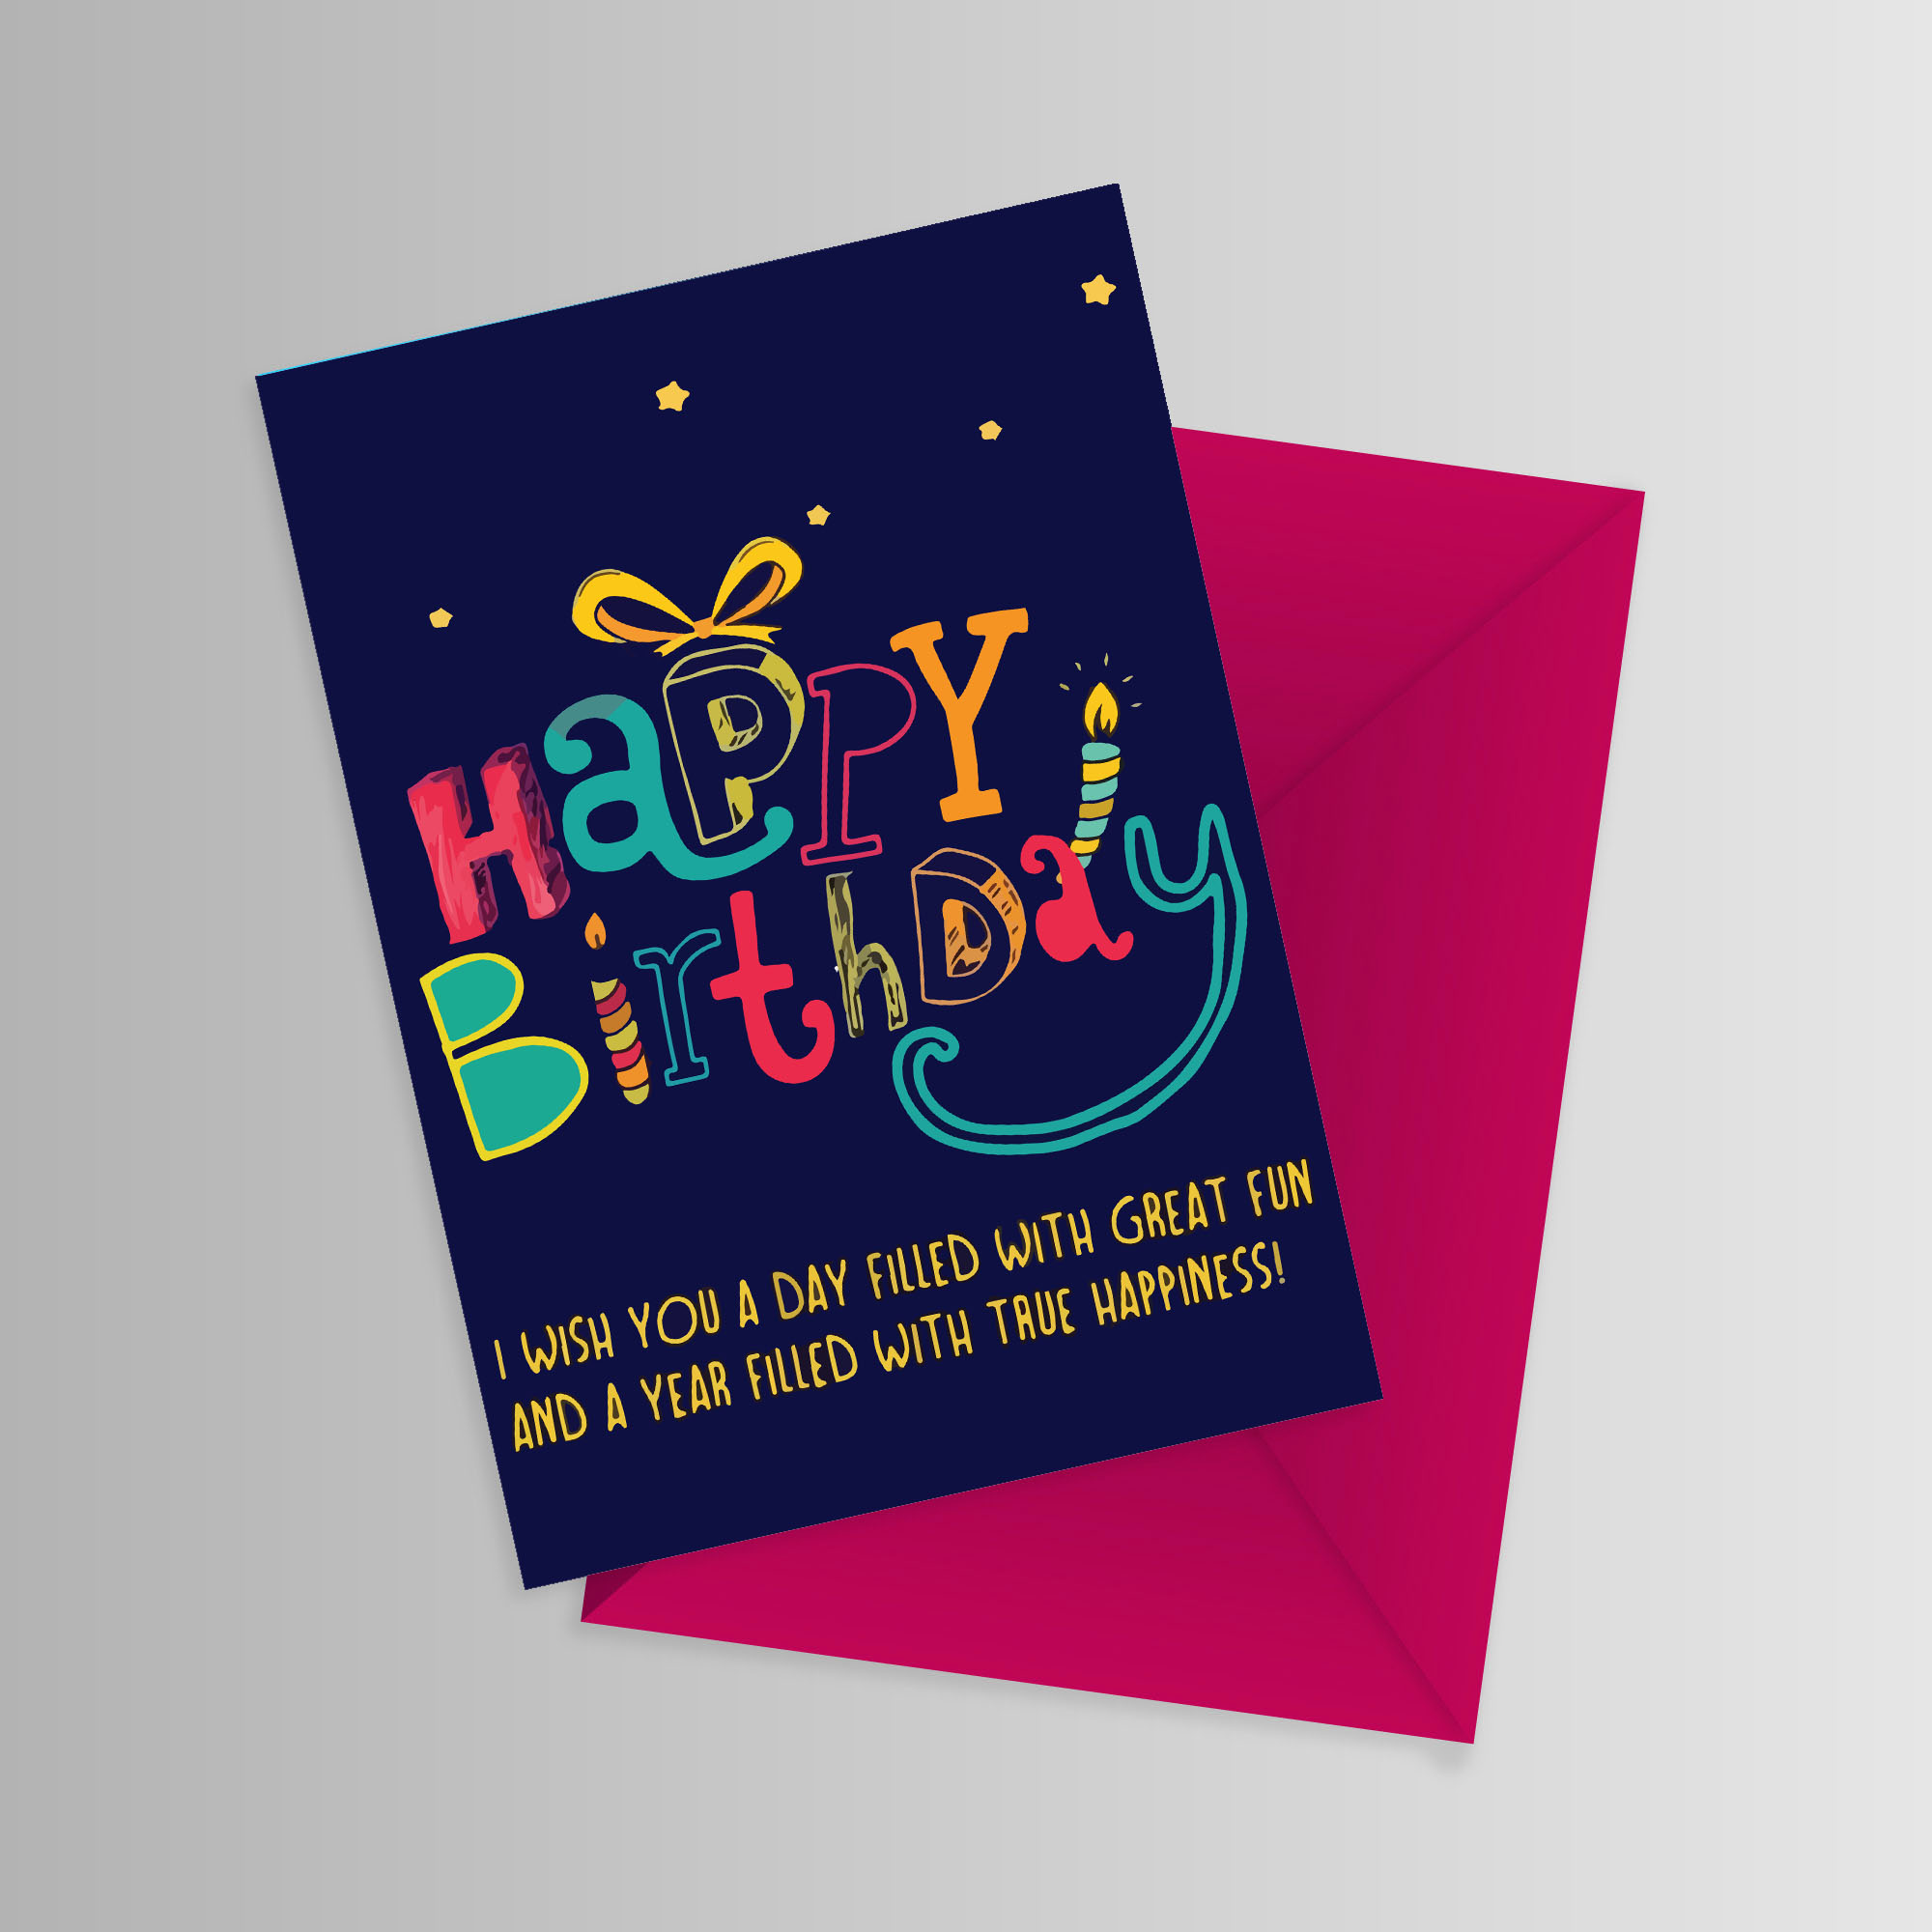 Happy birthday gift card Template | PosterMyWall